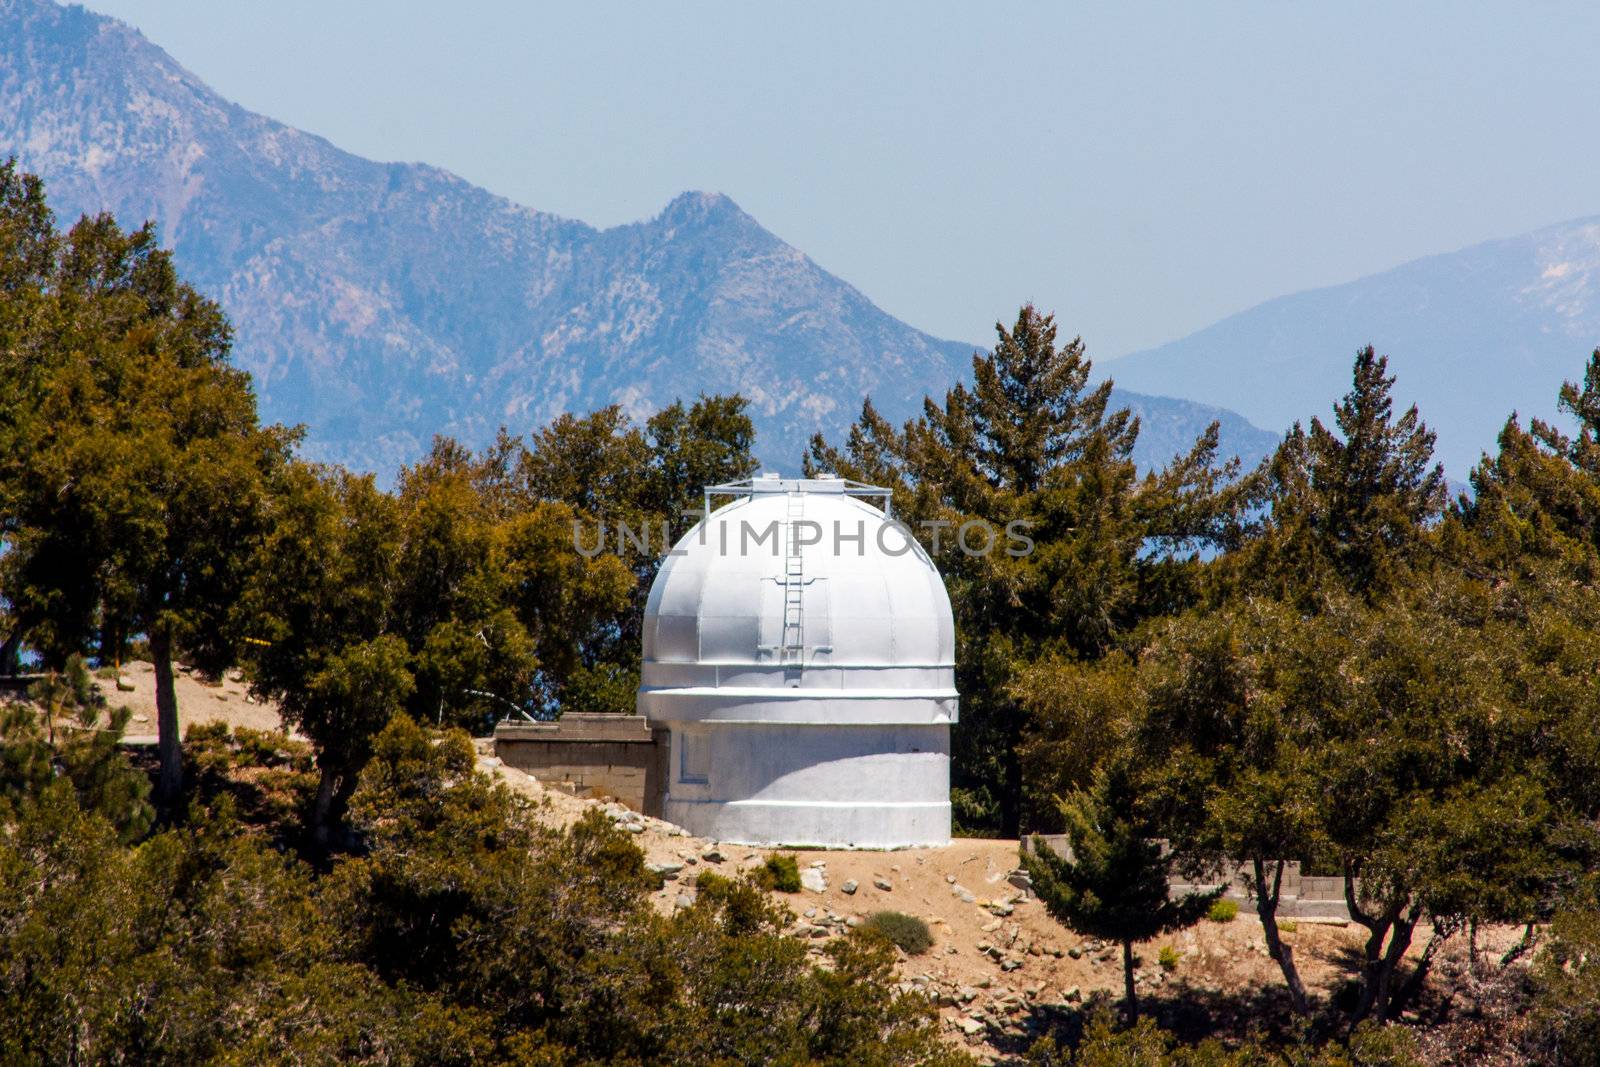 One of the Many Telescopes at Mount Wilson Observatory by wolterk